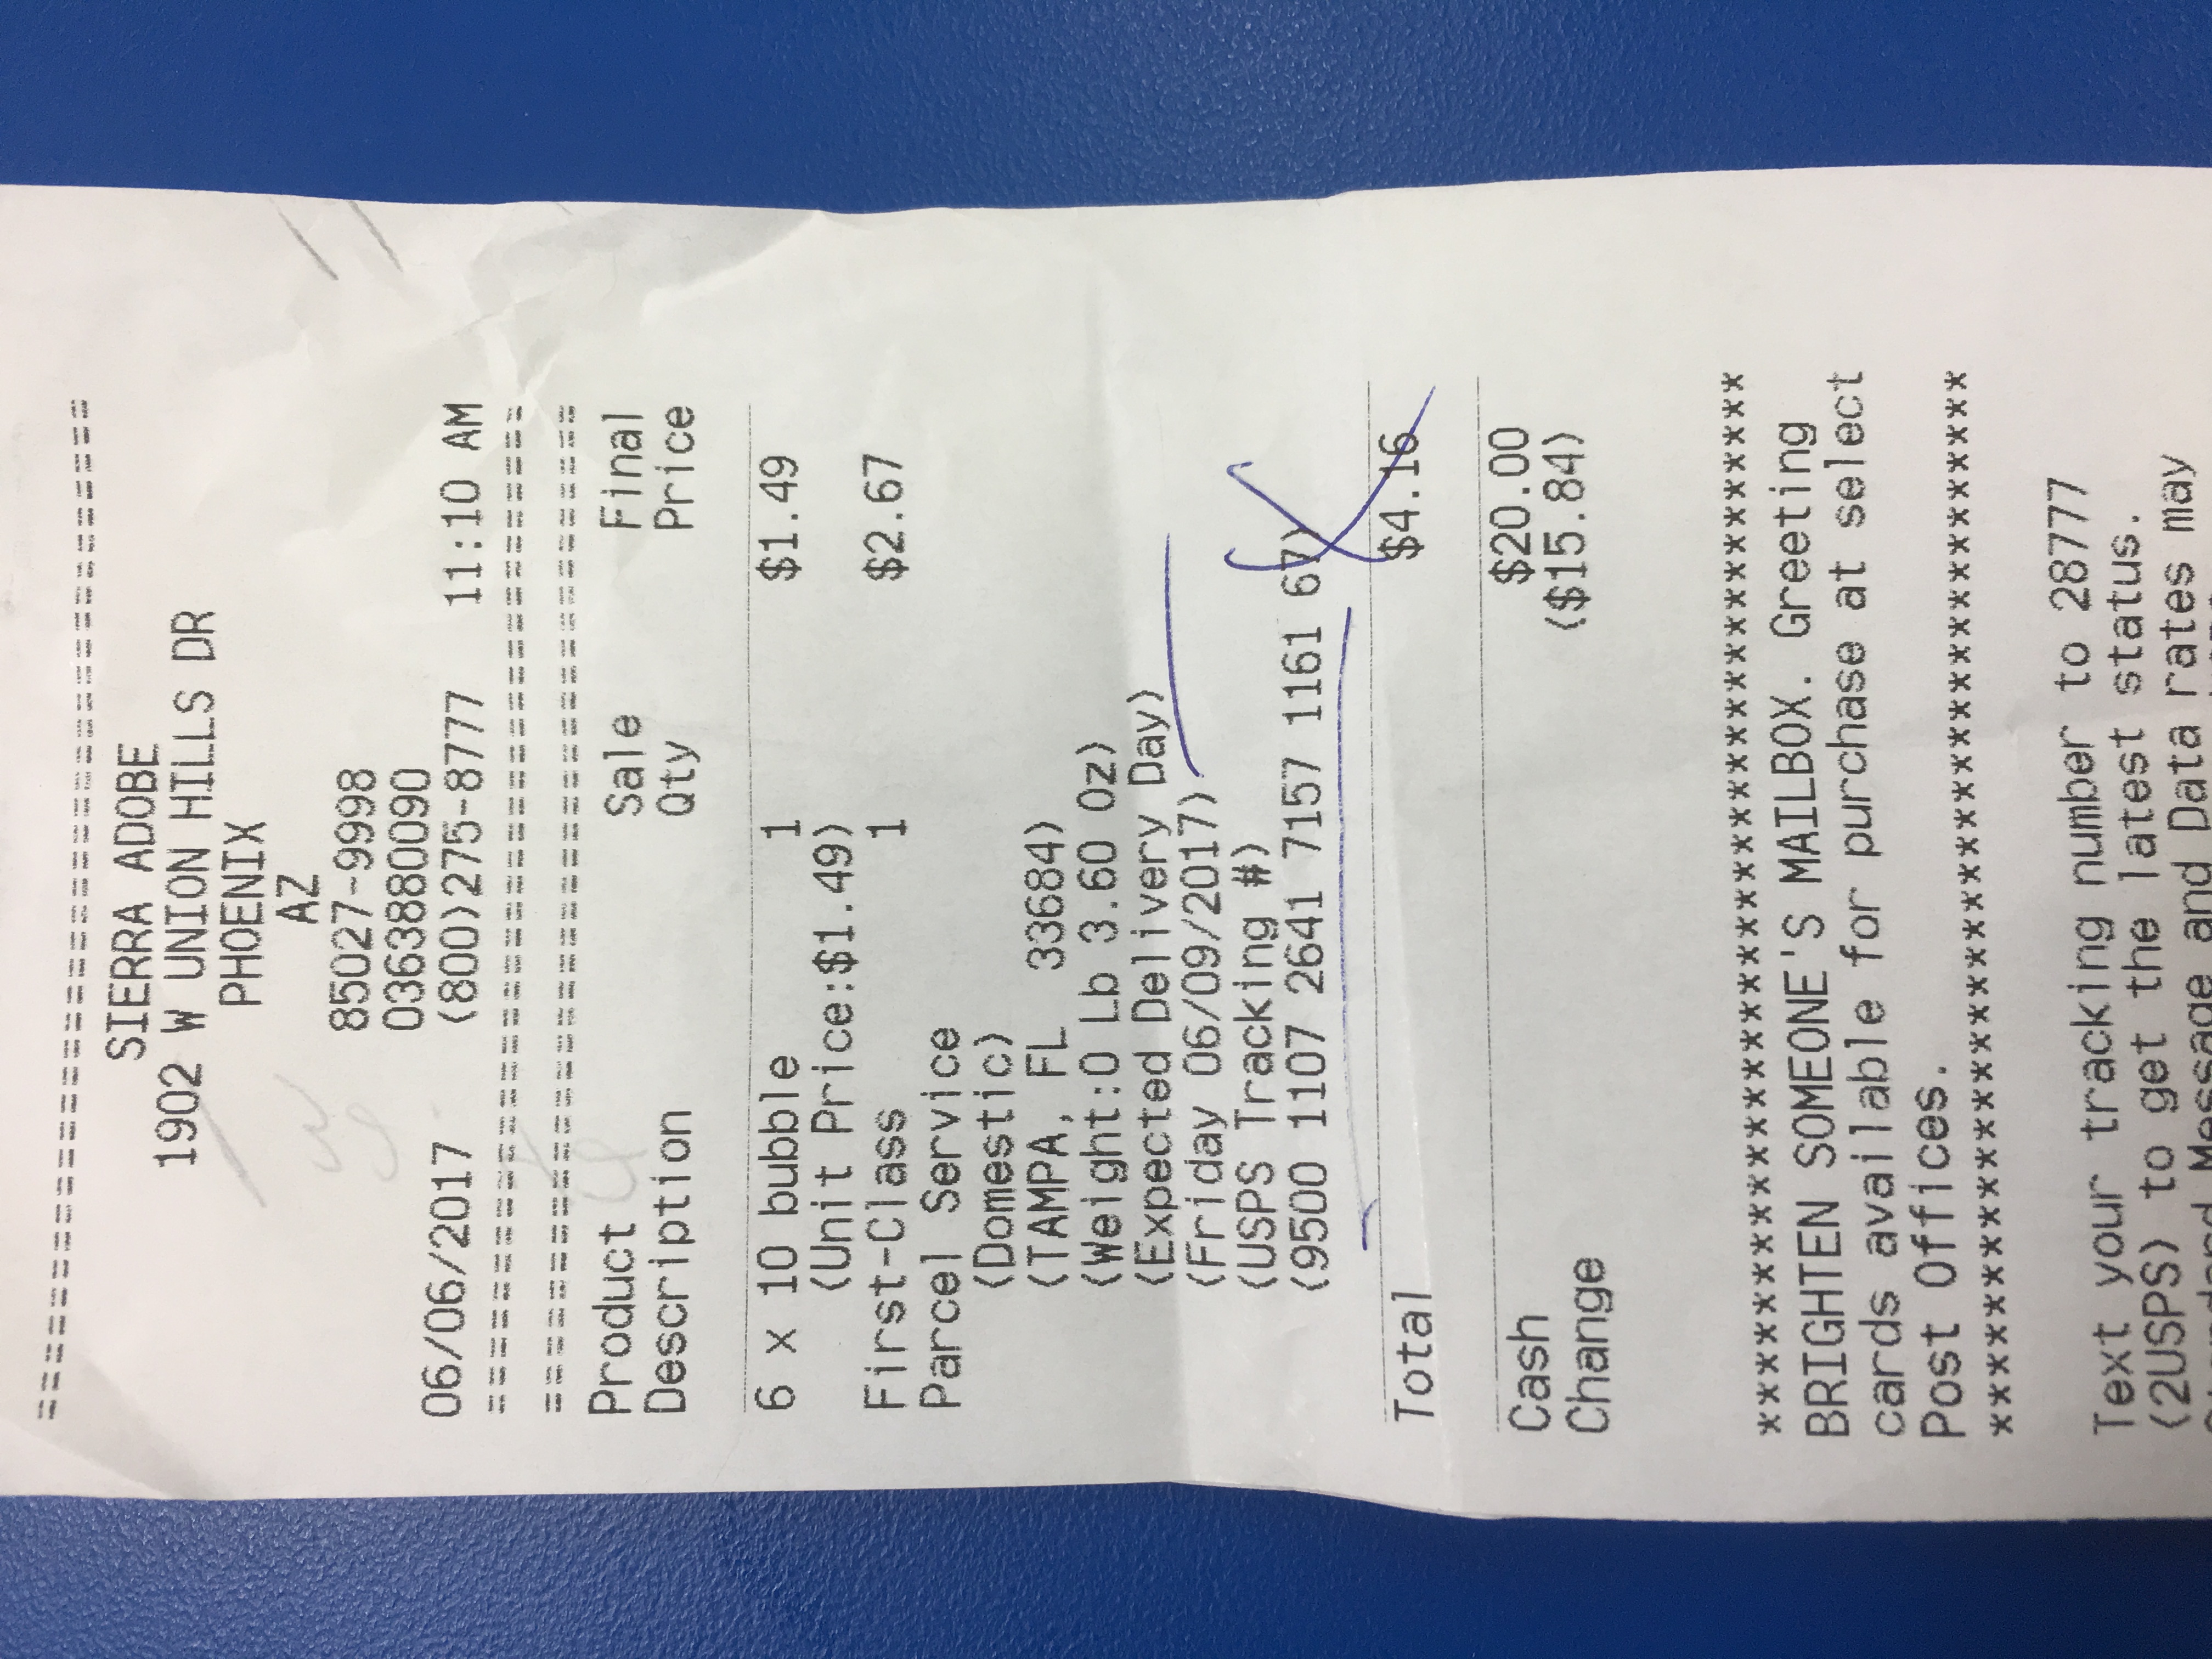 This is the receipt for the carcinia product mailed to the Florida warehouse the same day as the "Refused" delivery of the Allumiere product sent back to their Calif. warehouse address that was alread